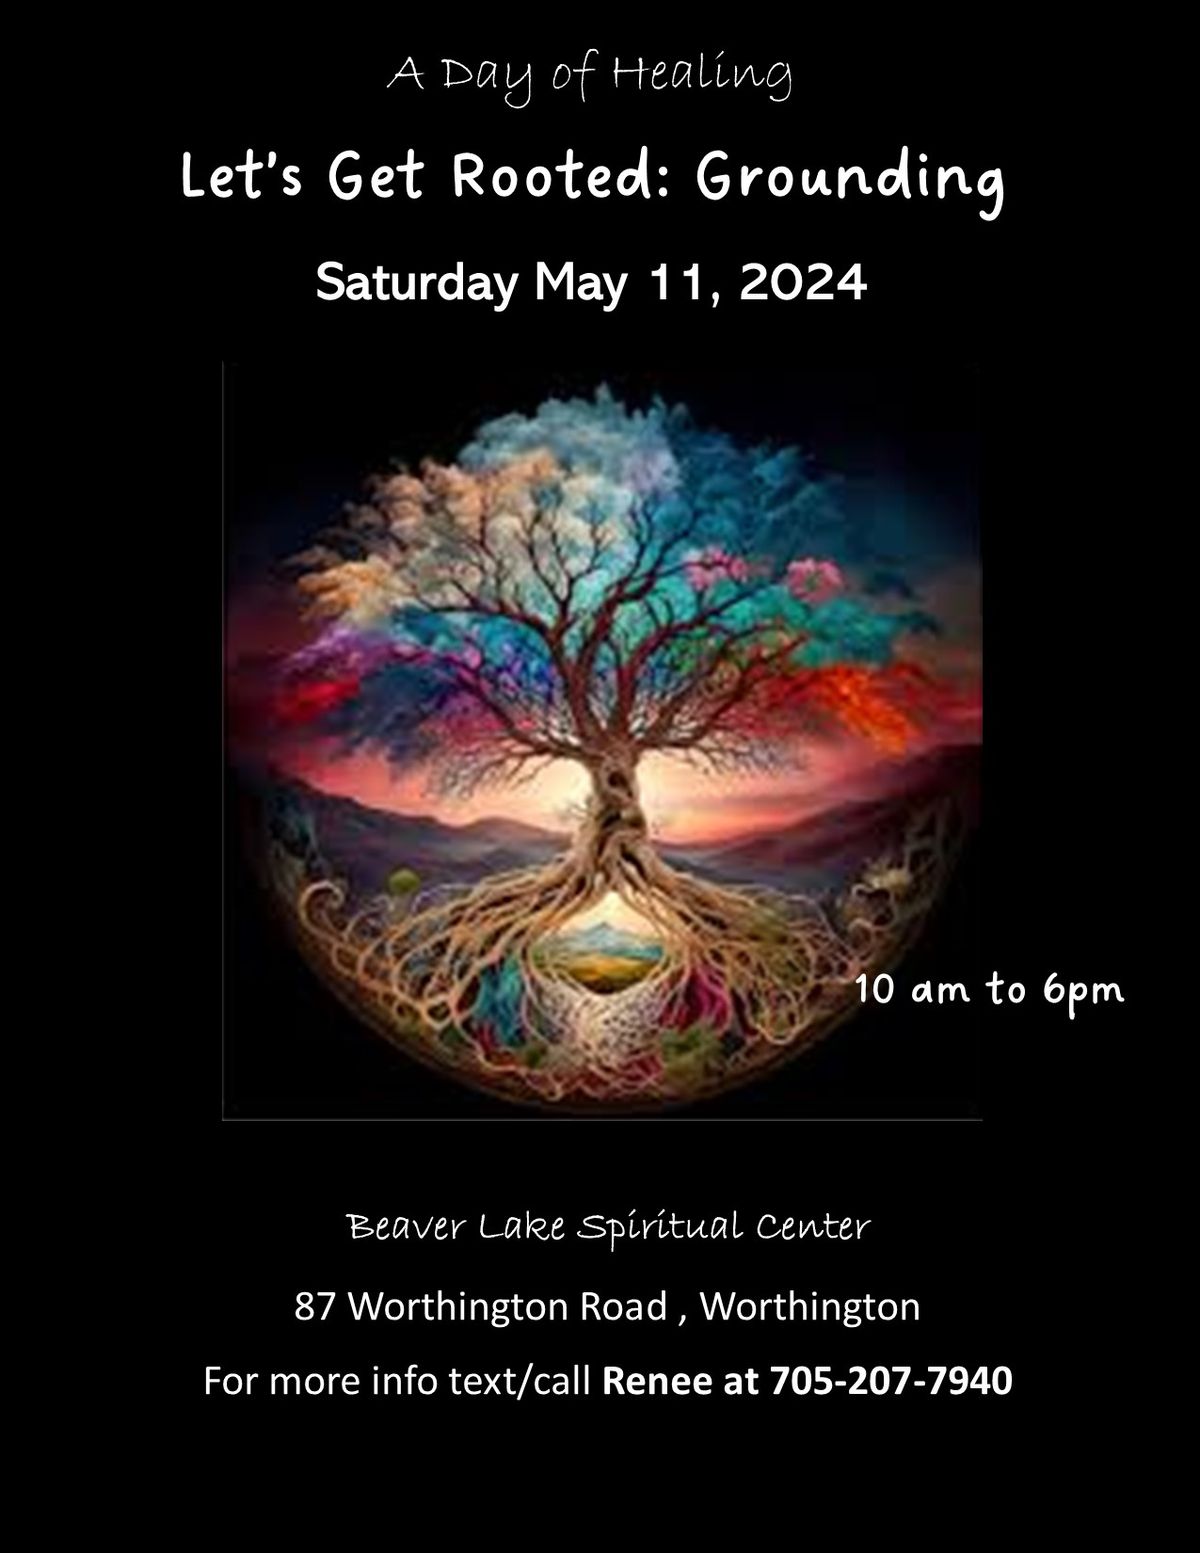 A Day of Healing "Let's Get Rooted"